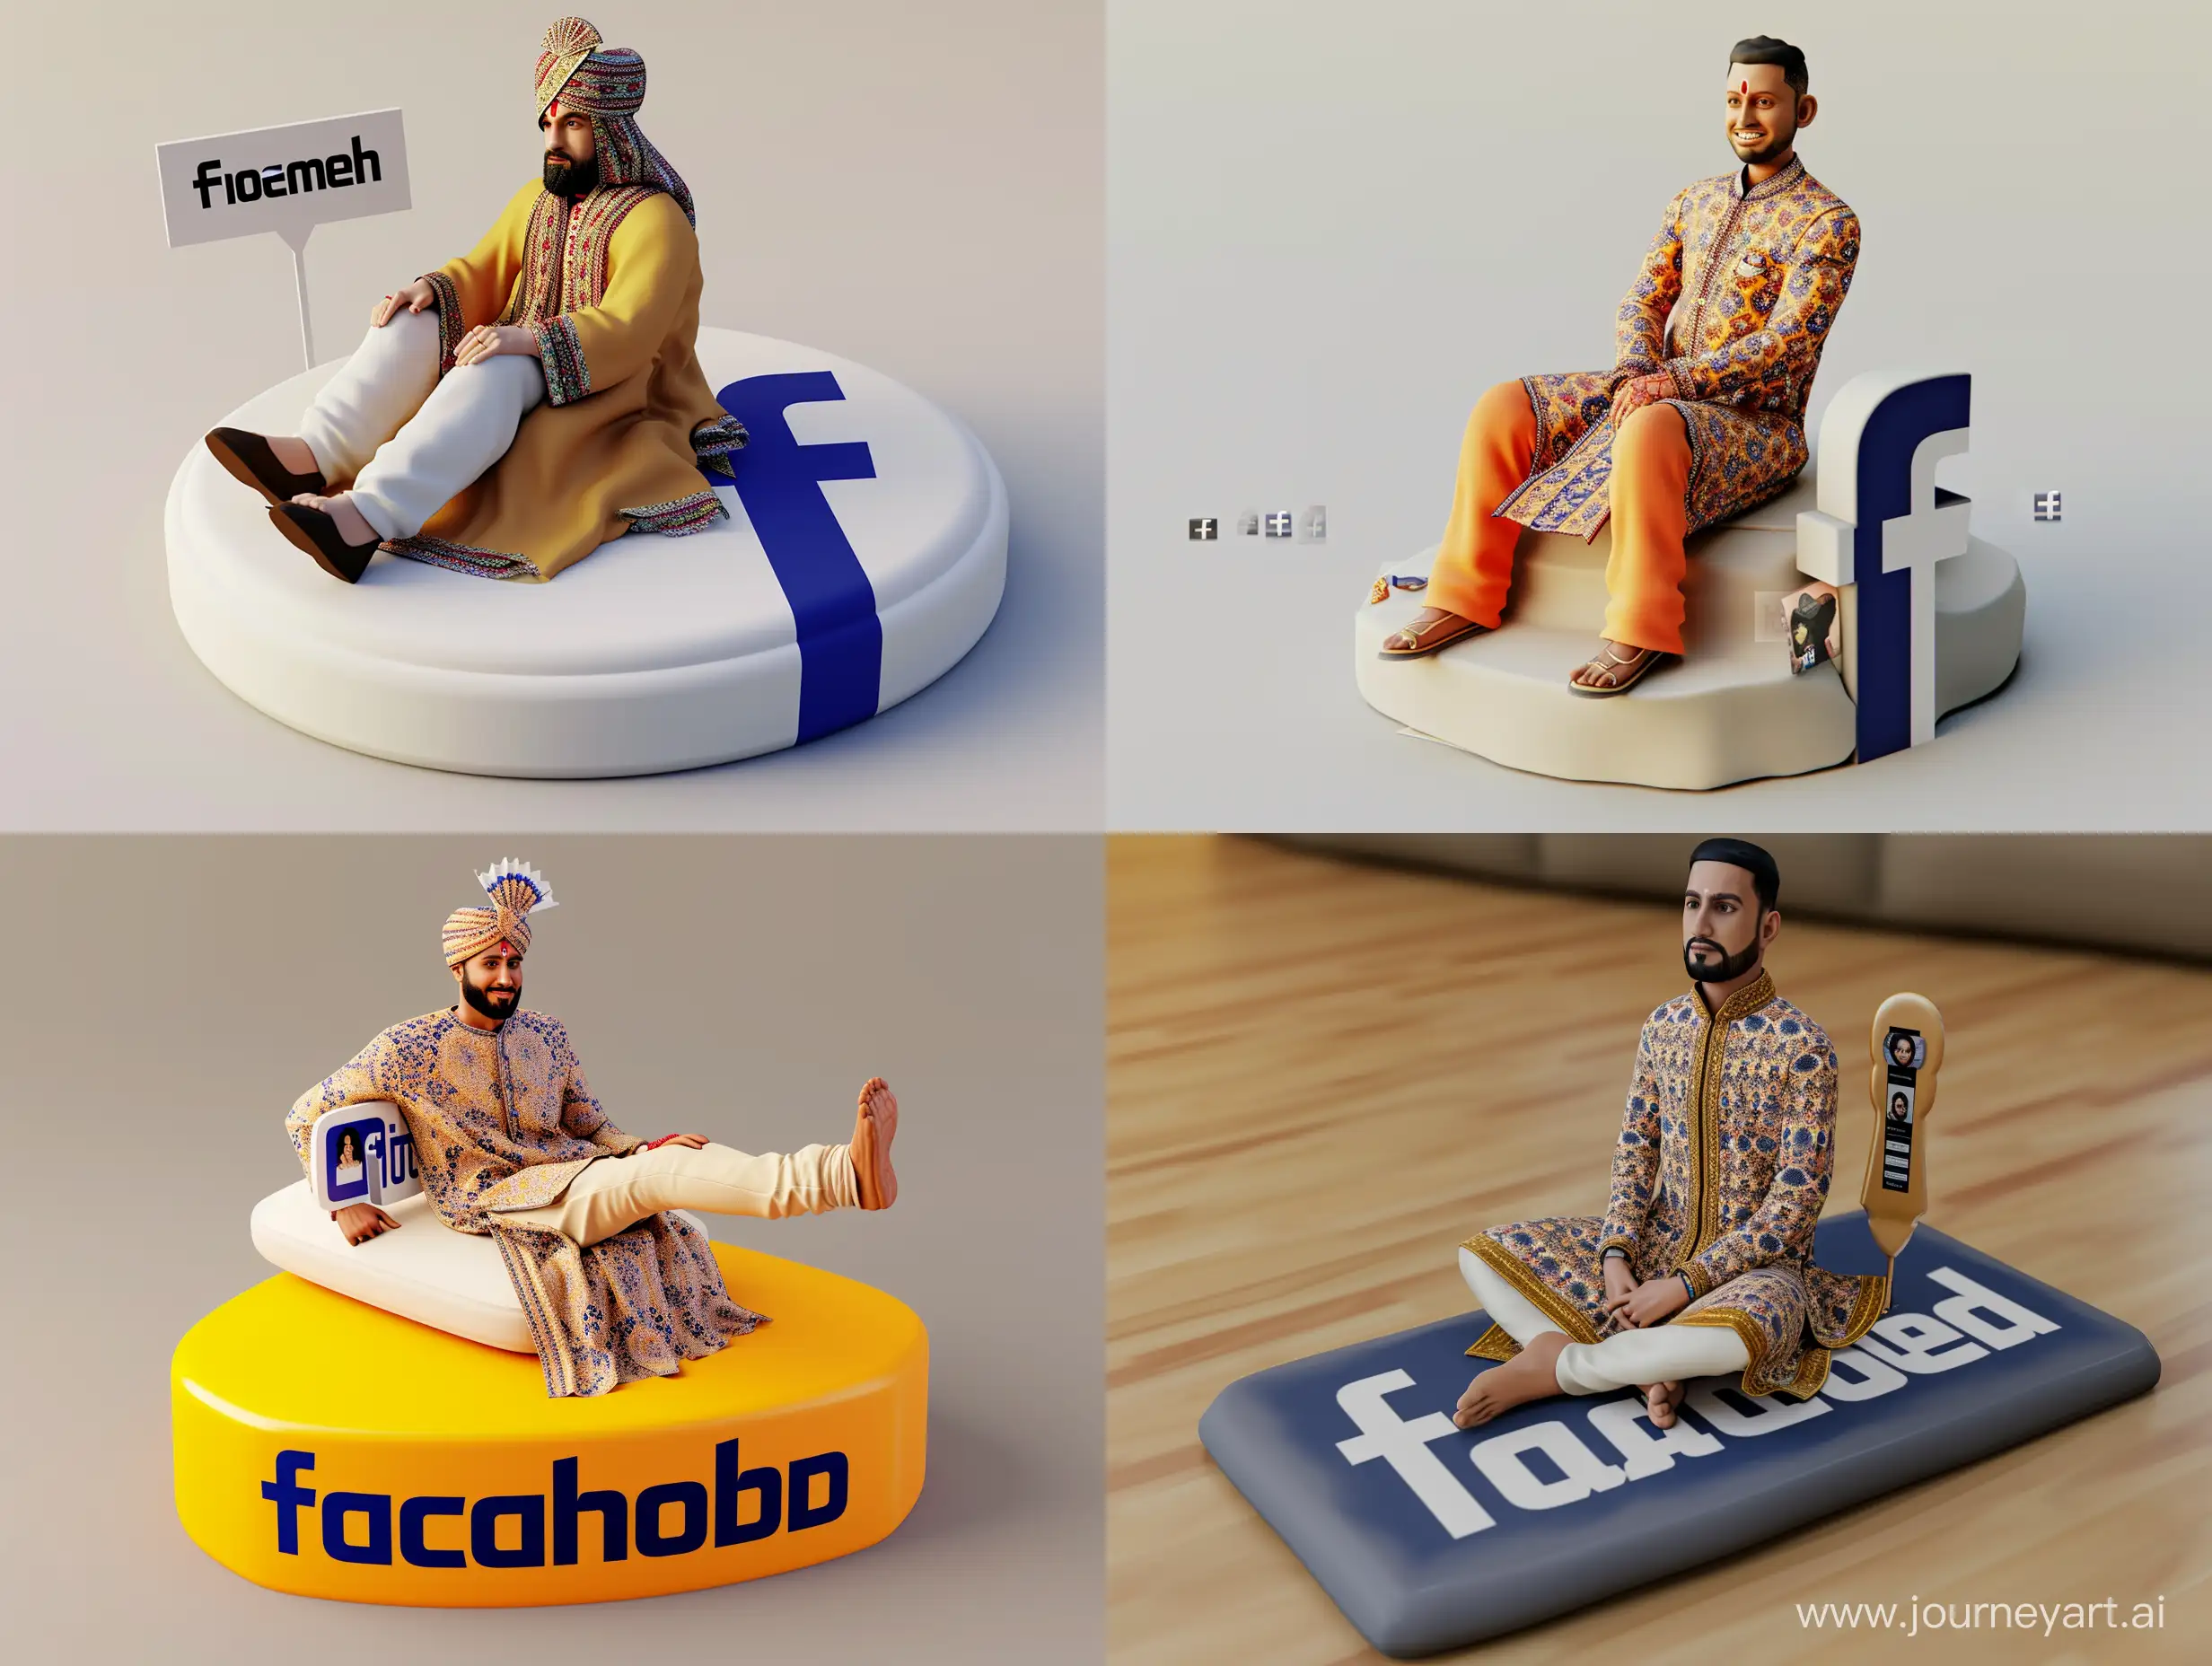 Generate an ultra-realistic 3D illustration featuring an Indian male character named Ahmed, sitting casually on top of a social media logo, 'Facebook.' Visualize Ahmed in a relaxed seated position, dressed in traditional Indian attire. Pay close attention to realistic details in the clothing, capturing the intricate patterns and textures. The background should simulate a social media profile page with the username 'Ahmed' and a profile picture that complements the character's traditional attire and cultural identity. Aim for an ultra-realistic portrayal that reflects Ahmed's heritage and exudes a positive and empowering vibe in this cultural context